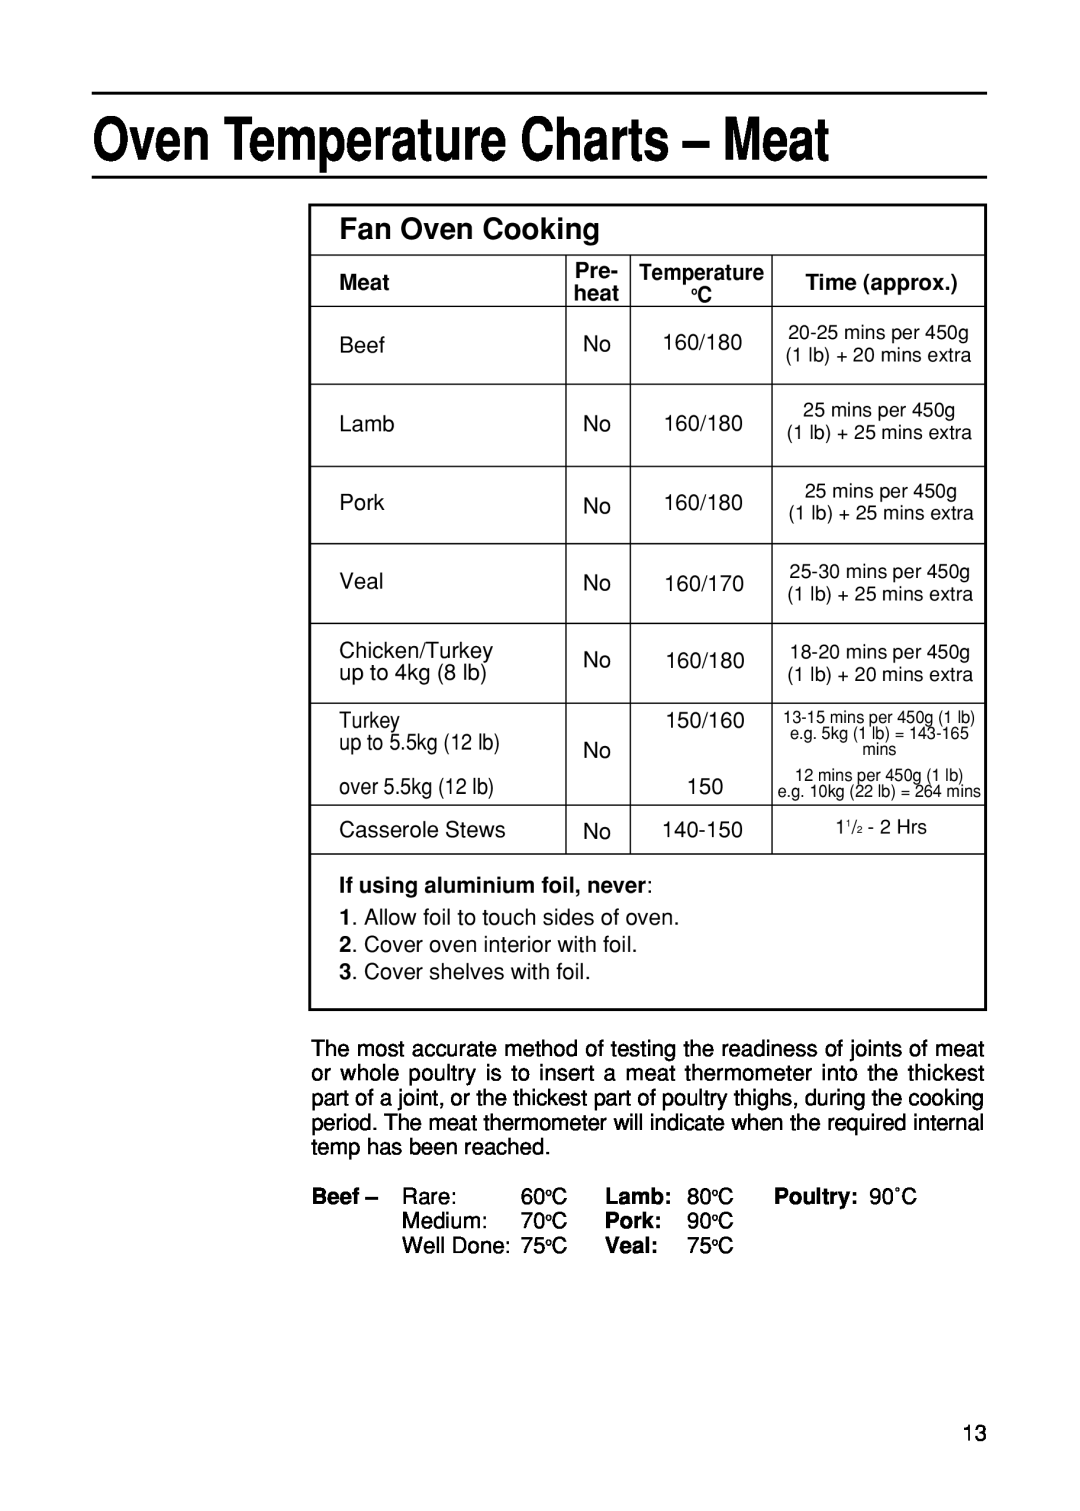 Hotpoint EG21 manual Oven Temperature Charts - Meat, Fan Oven Cooking 